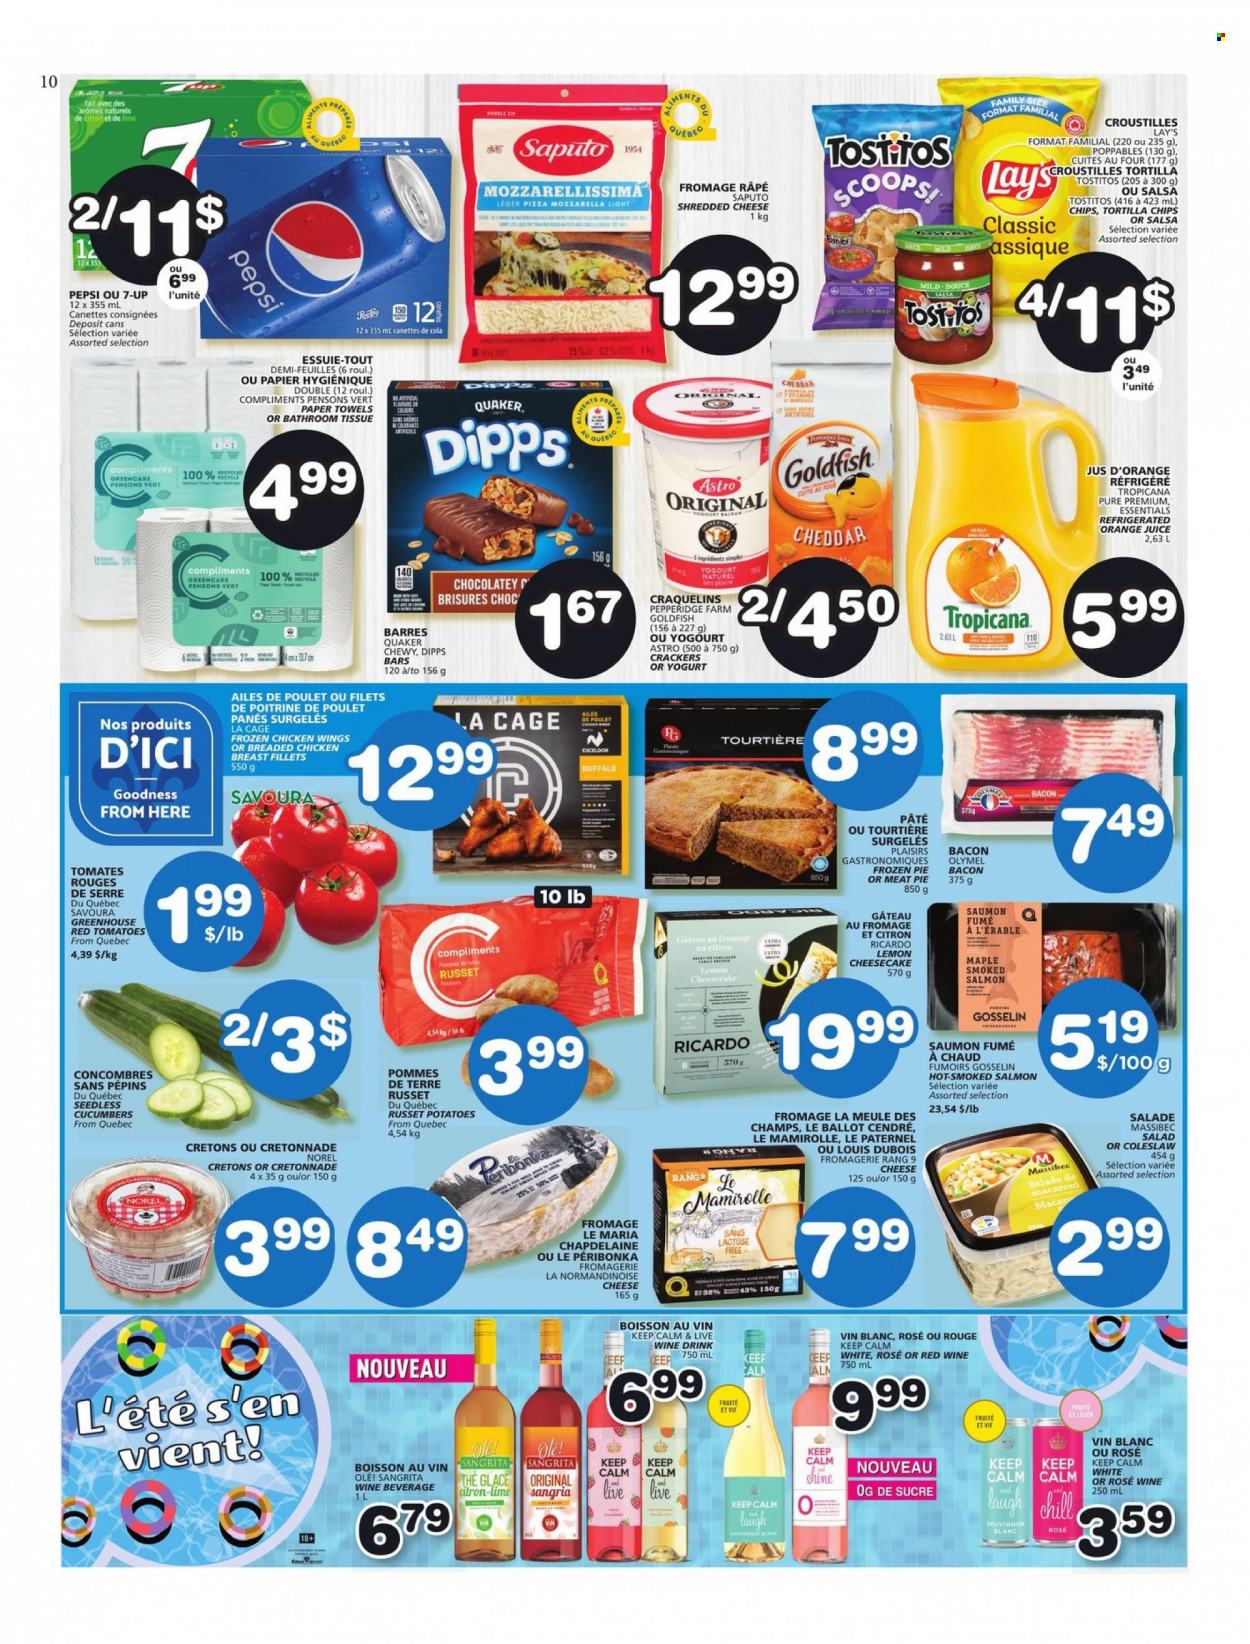 thumbnail - Les Marchés Tradition Flyer - May 19, 2022 - May 25, 2022 - Sales products - pie, cheesecake, cucumber, russet potatoes, potatoes, salmon, smoked salmon, coleslaw, pizza, macaroni, Quaker, bacon, shredded cheese, yoghurt, chicken wings, crackers, tortilla chips, Lay’s, Goldfish, Tostitos, salsa, Pepsi, orange juice, juice, 7UP, red wine, wine, rosé wine, chicken, bath tissue, kitchen towels, paper towels. Page 10.